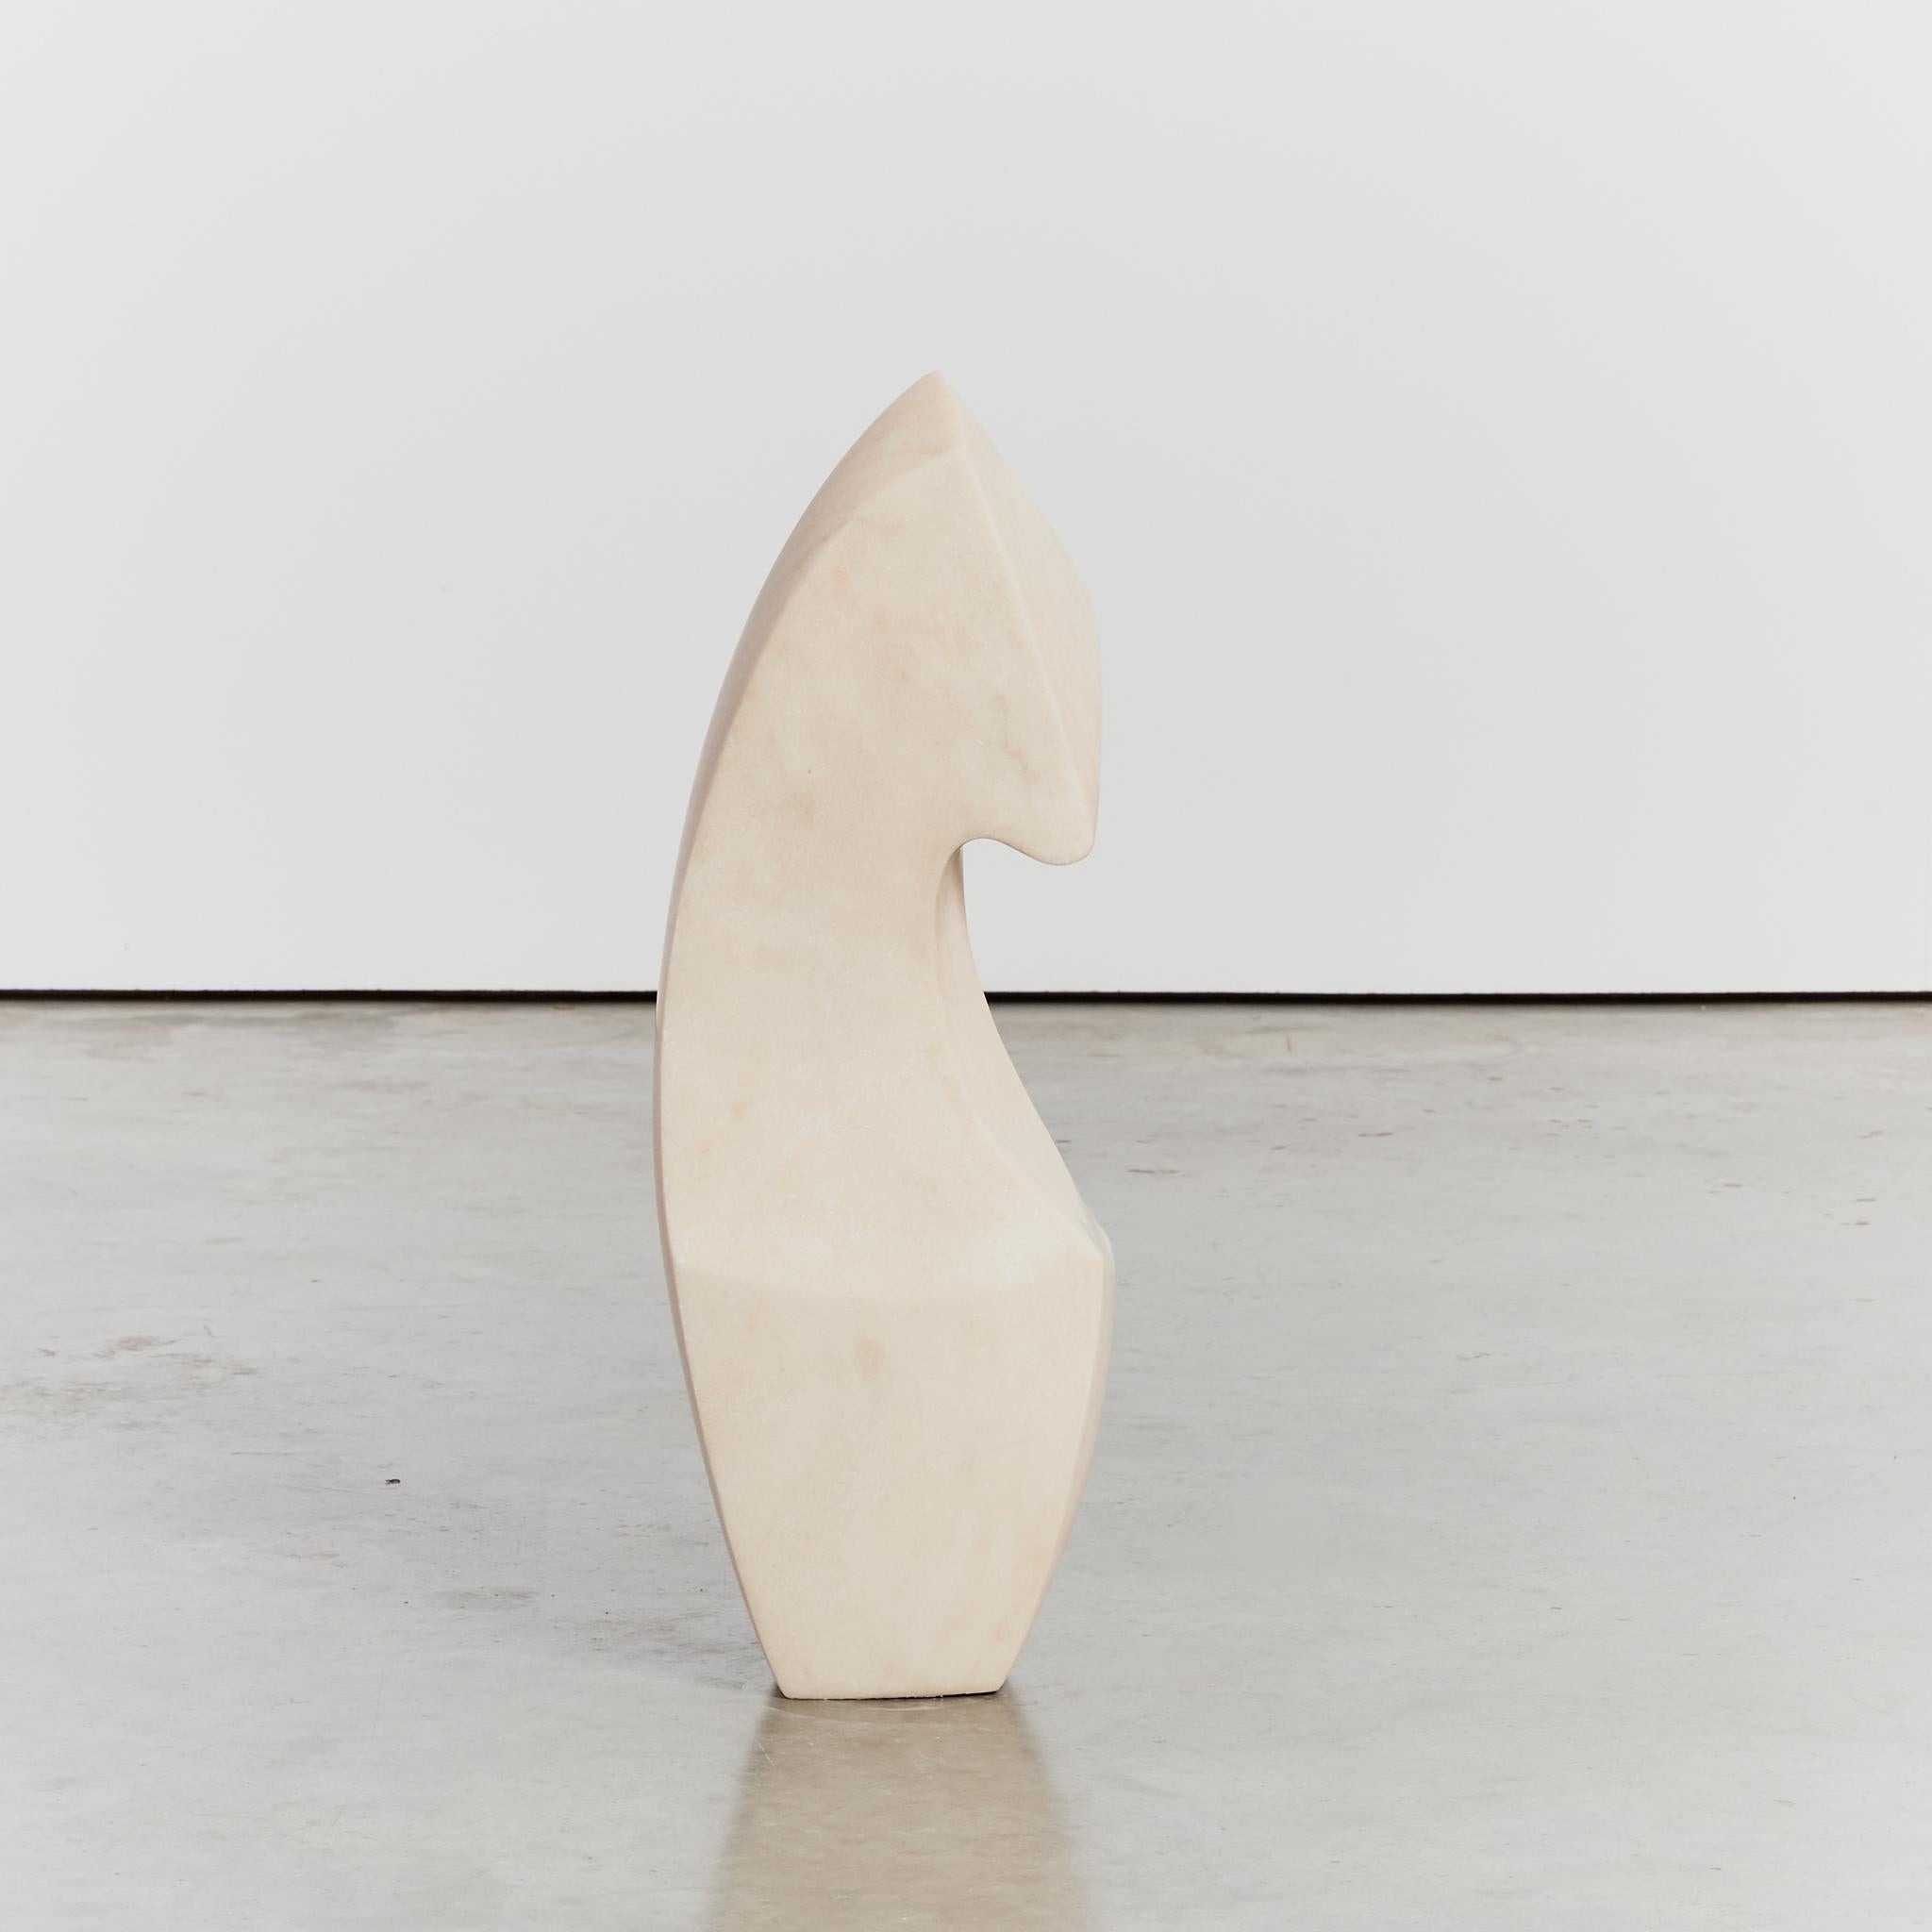 Oversized simplistic abstract silhouette, carved from a single piece of creamy  Portuguese marble from the area of Estremoz. This floor standing sculpture boasts multiple viewing angles with some facets showing subtle terracotta viening.

Artist: